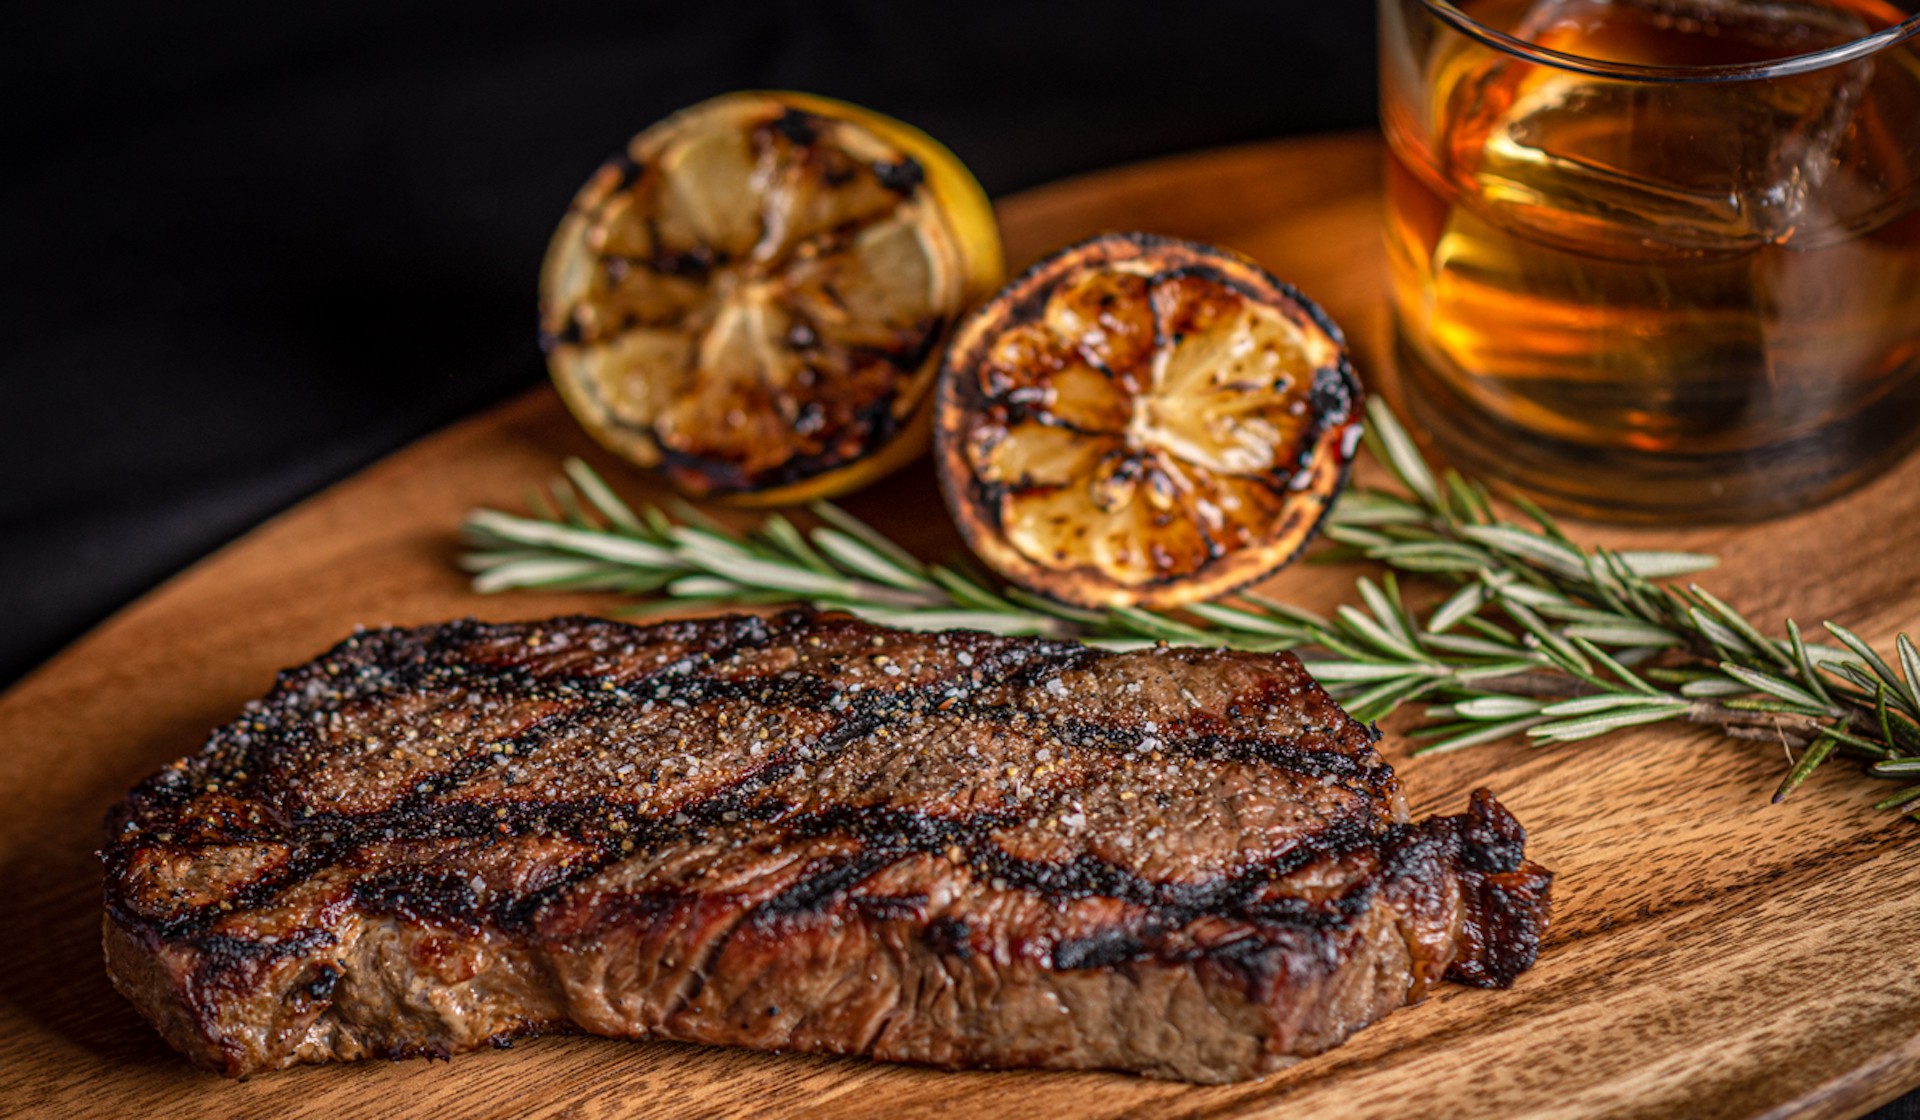 SOBEWFF Presents: Steak and Whiskey hosted by Michael Symon